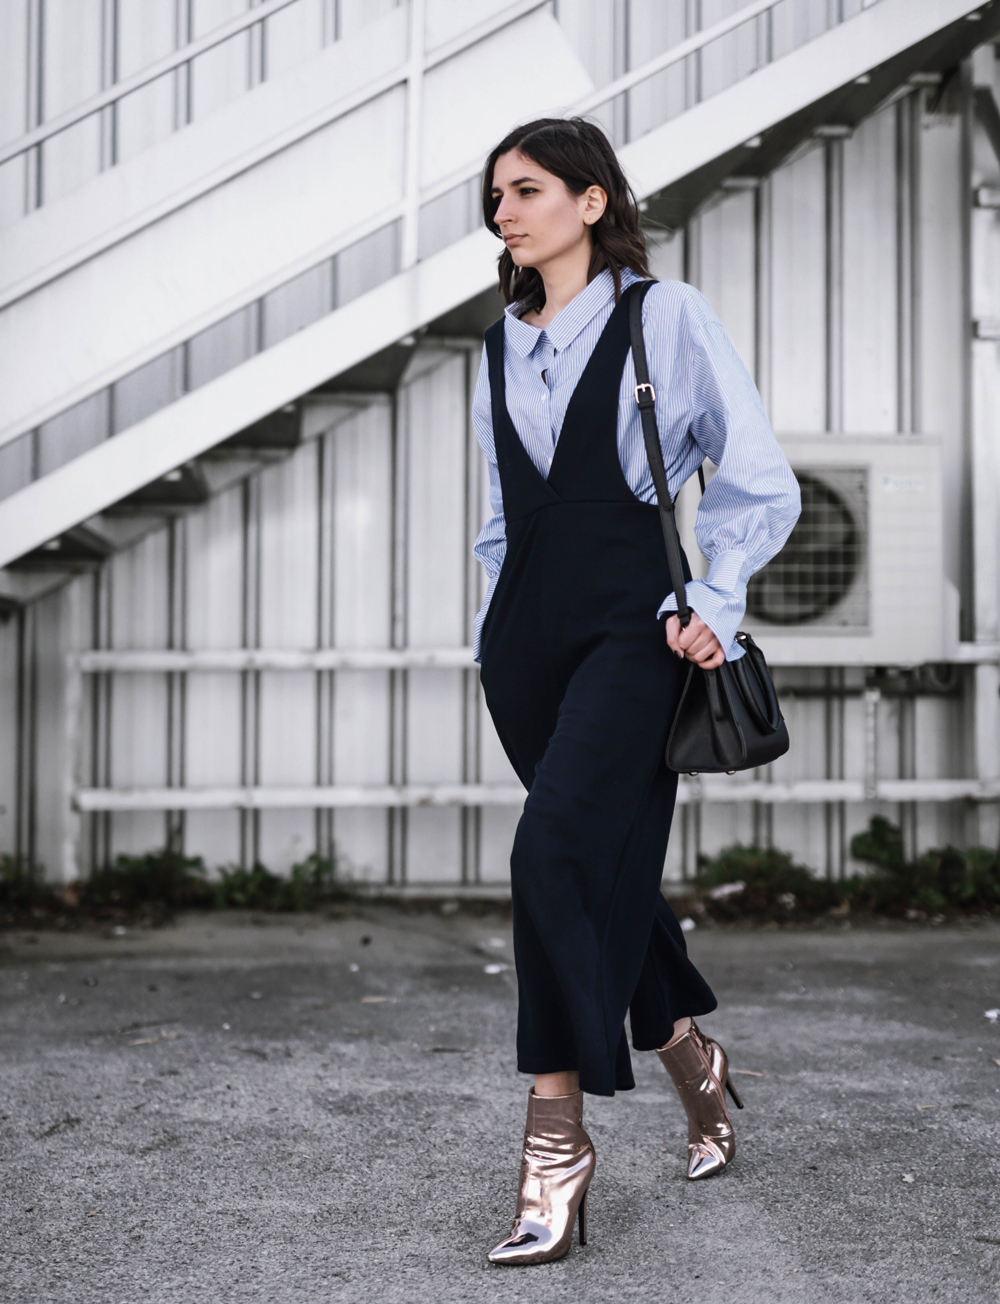 Layering a jumpsuit for spring